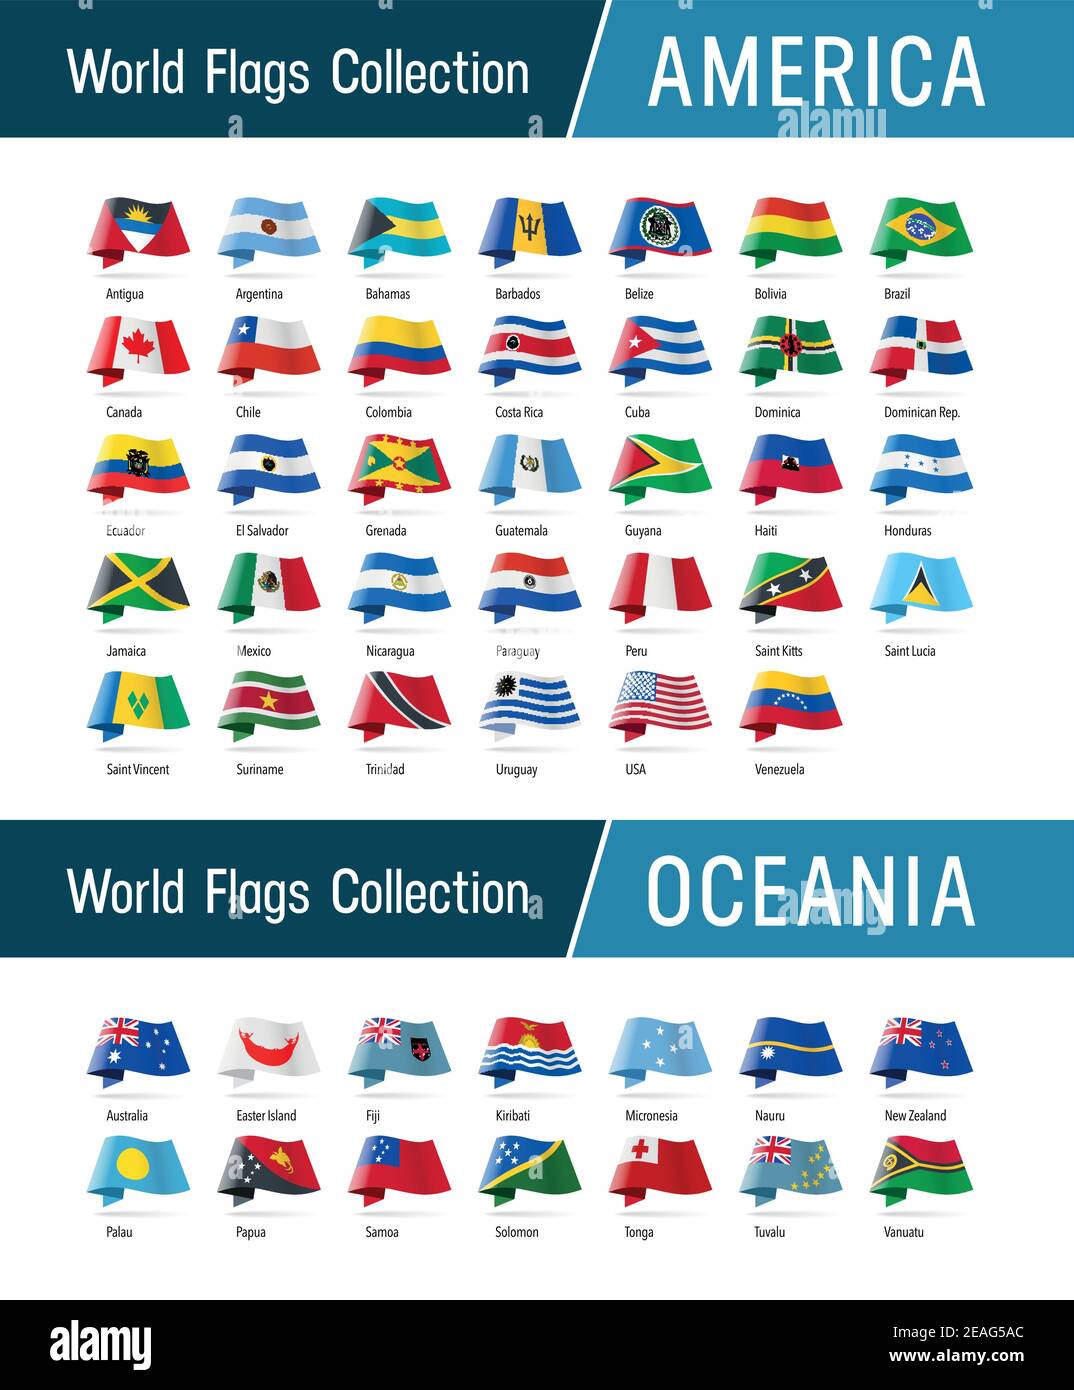 Flags of America and Oceania, waving in the wind. Icons pointing location, origin, language. Vector world flags collection. Stock Vector